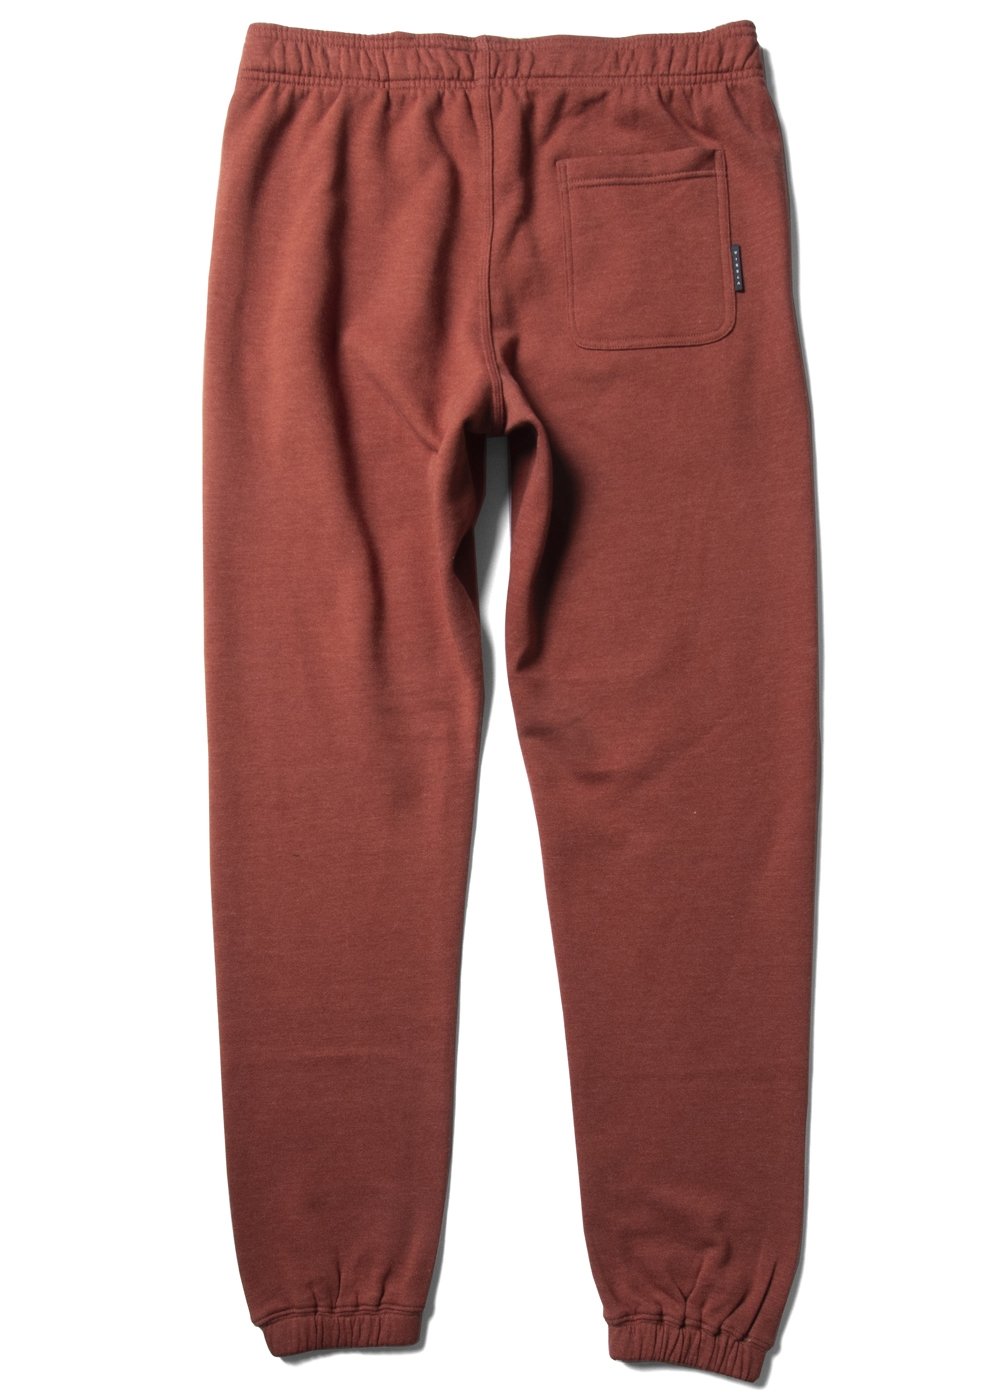 Solid Sets Eco Elastic Sweatpant - BARN RED HEATHER